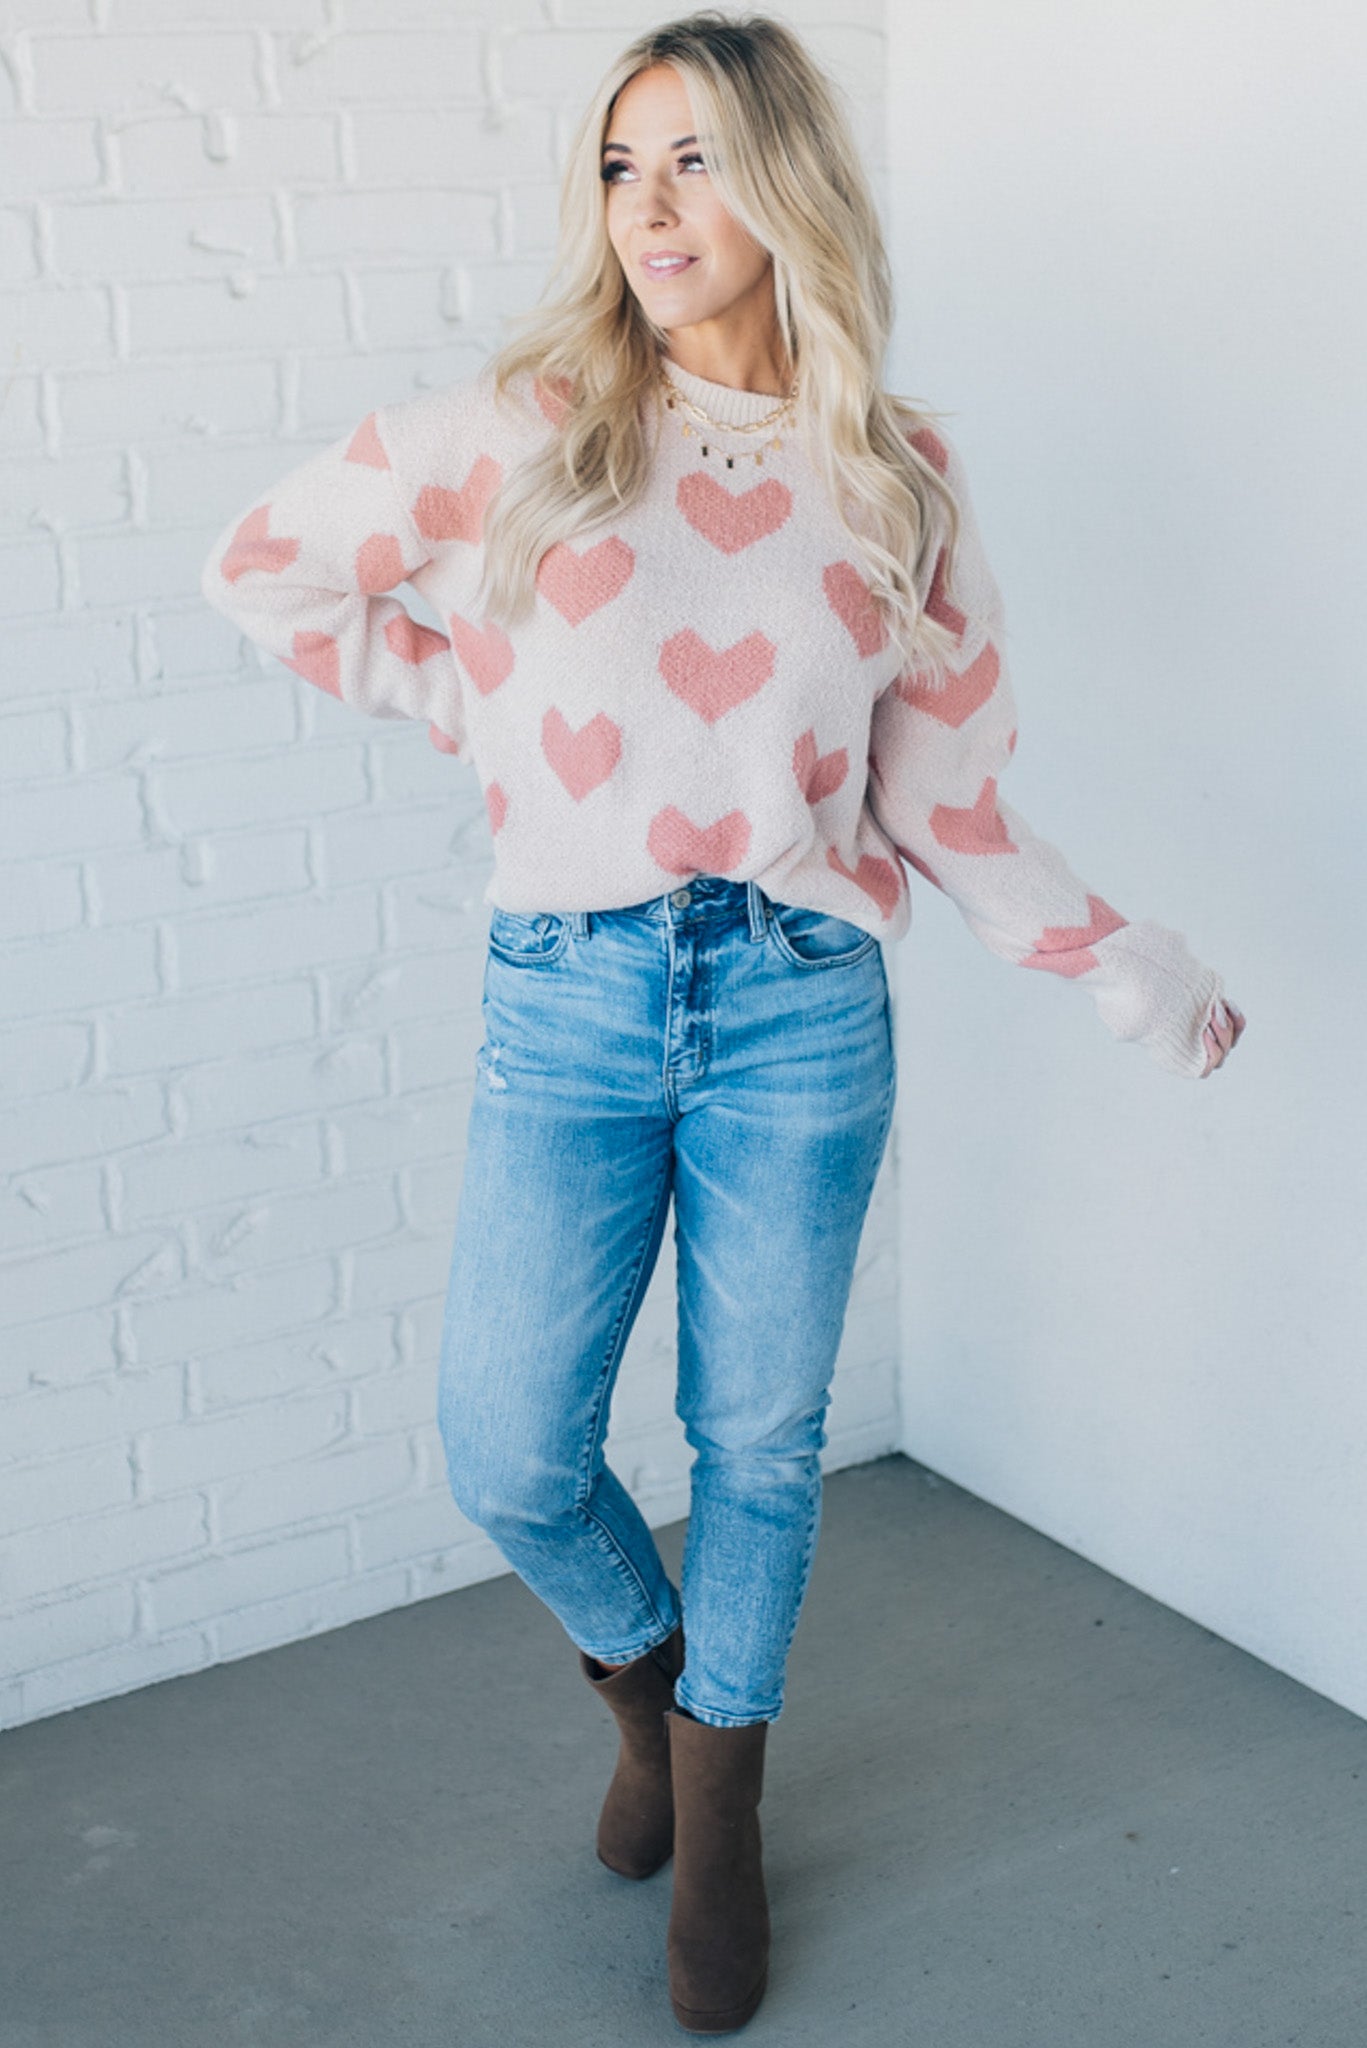 Blushed Hearts Sweater